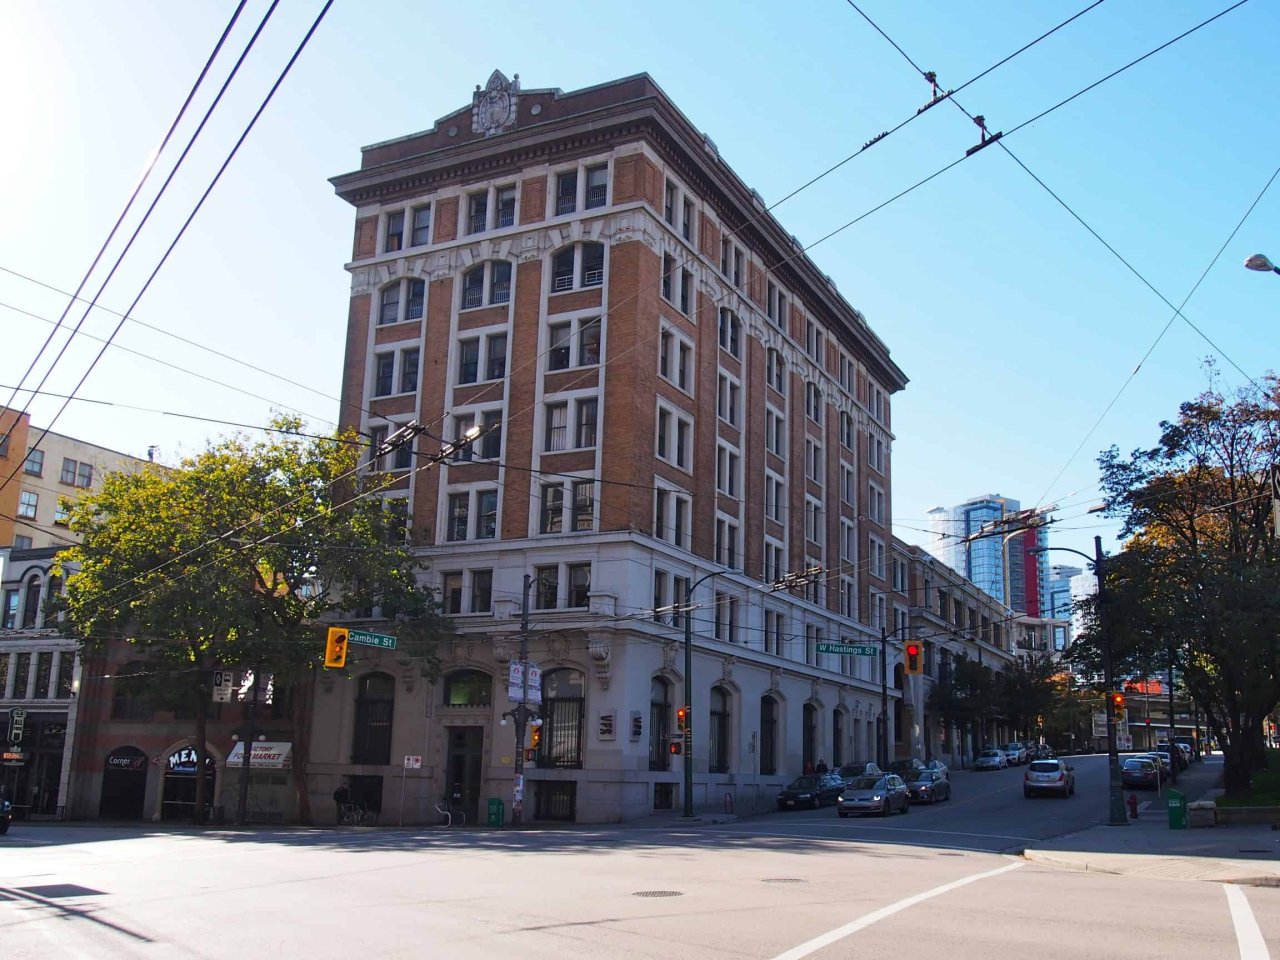 Province Building at 198 W Hastings Street. Credit: Madeleine de Trenquayle